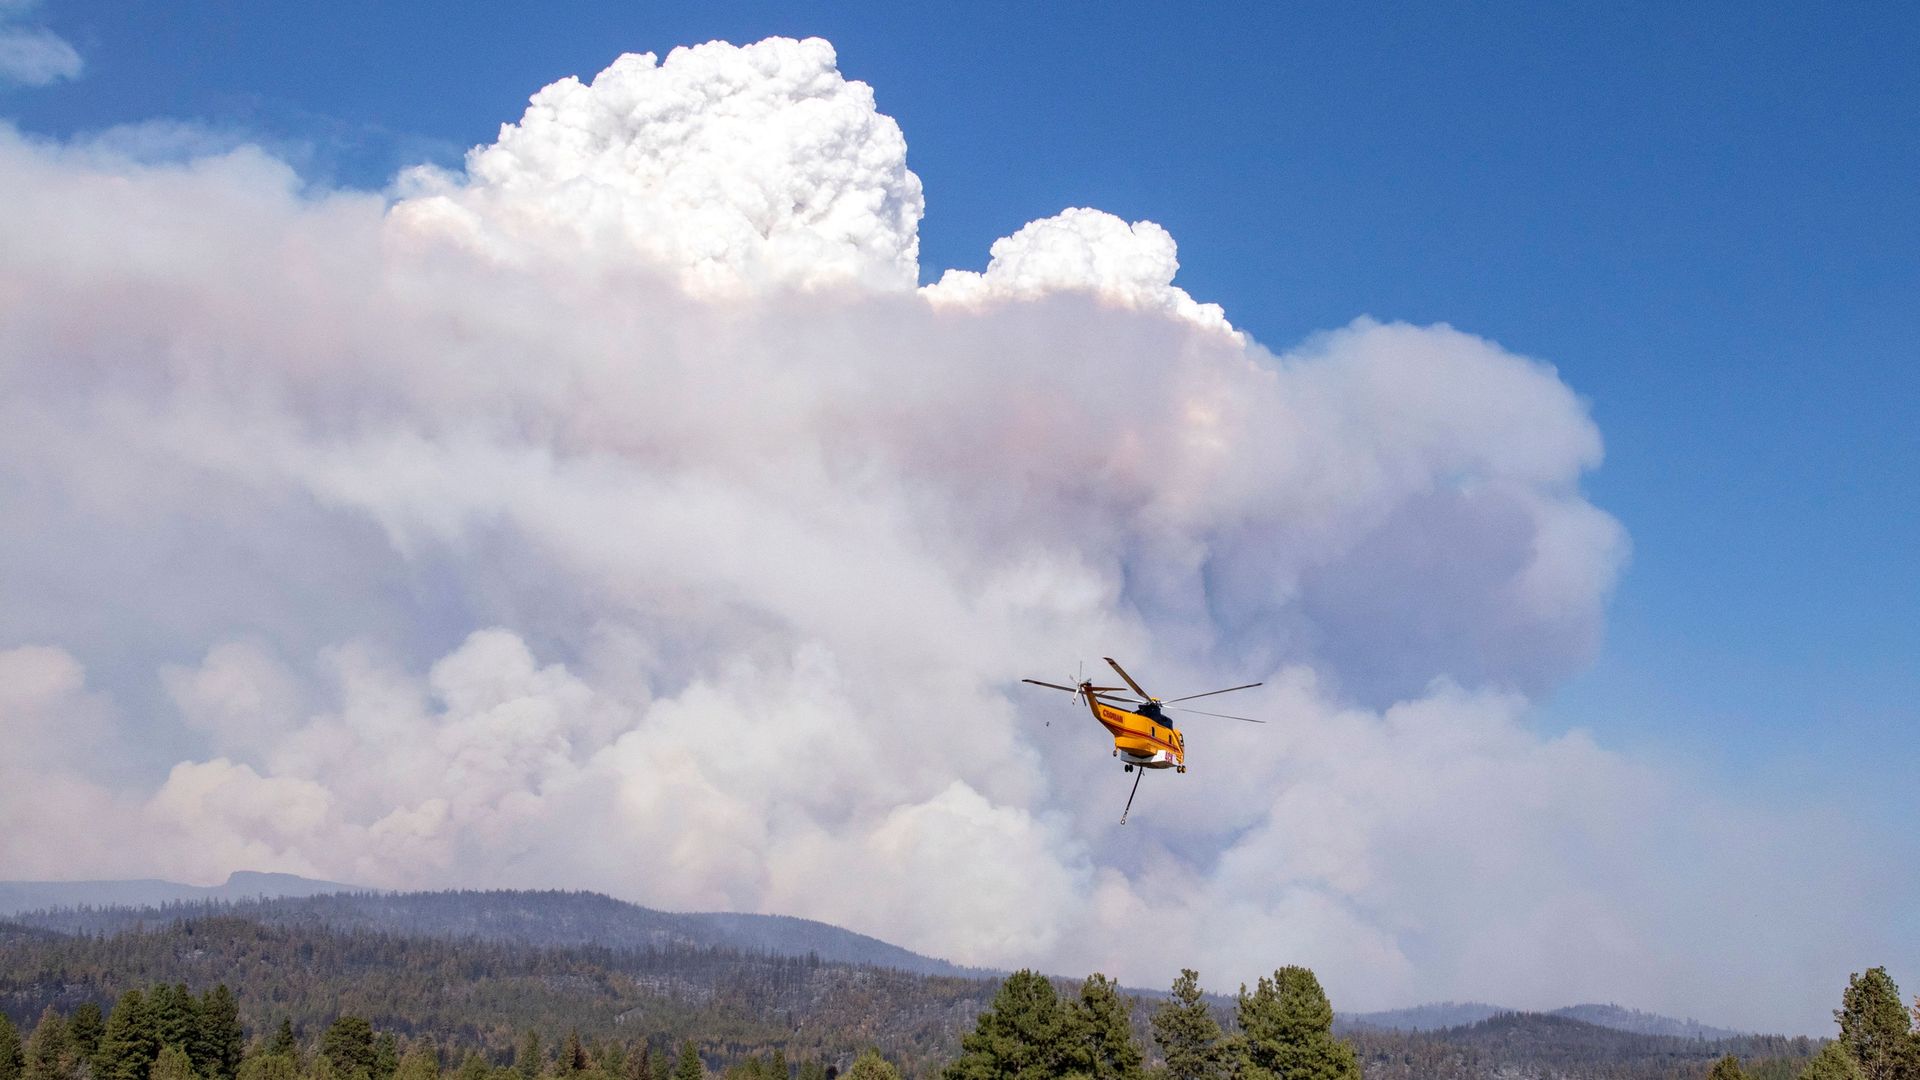 A helicopter flies with a load of water to the Bootleg Fire, 27 miles northeast of Klamath Falls, near Bly, Oregon on July 15